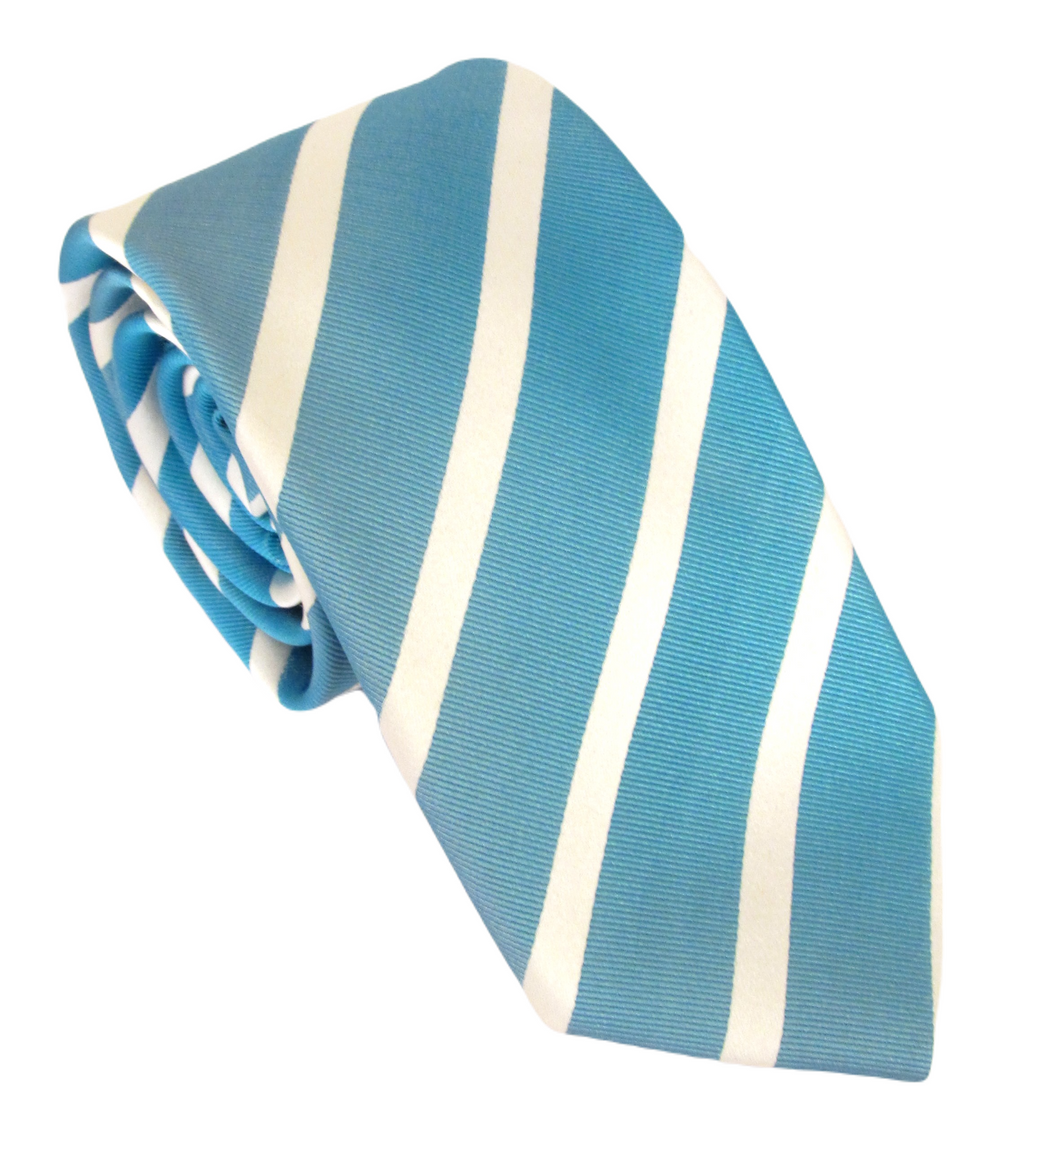 Striped Teal With White Silk Tie